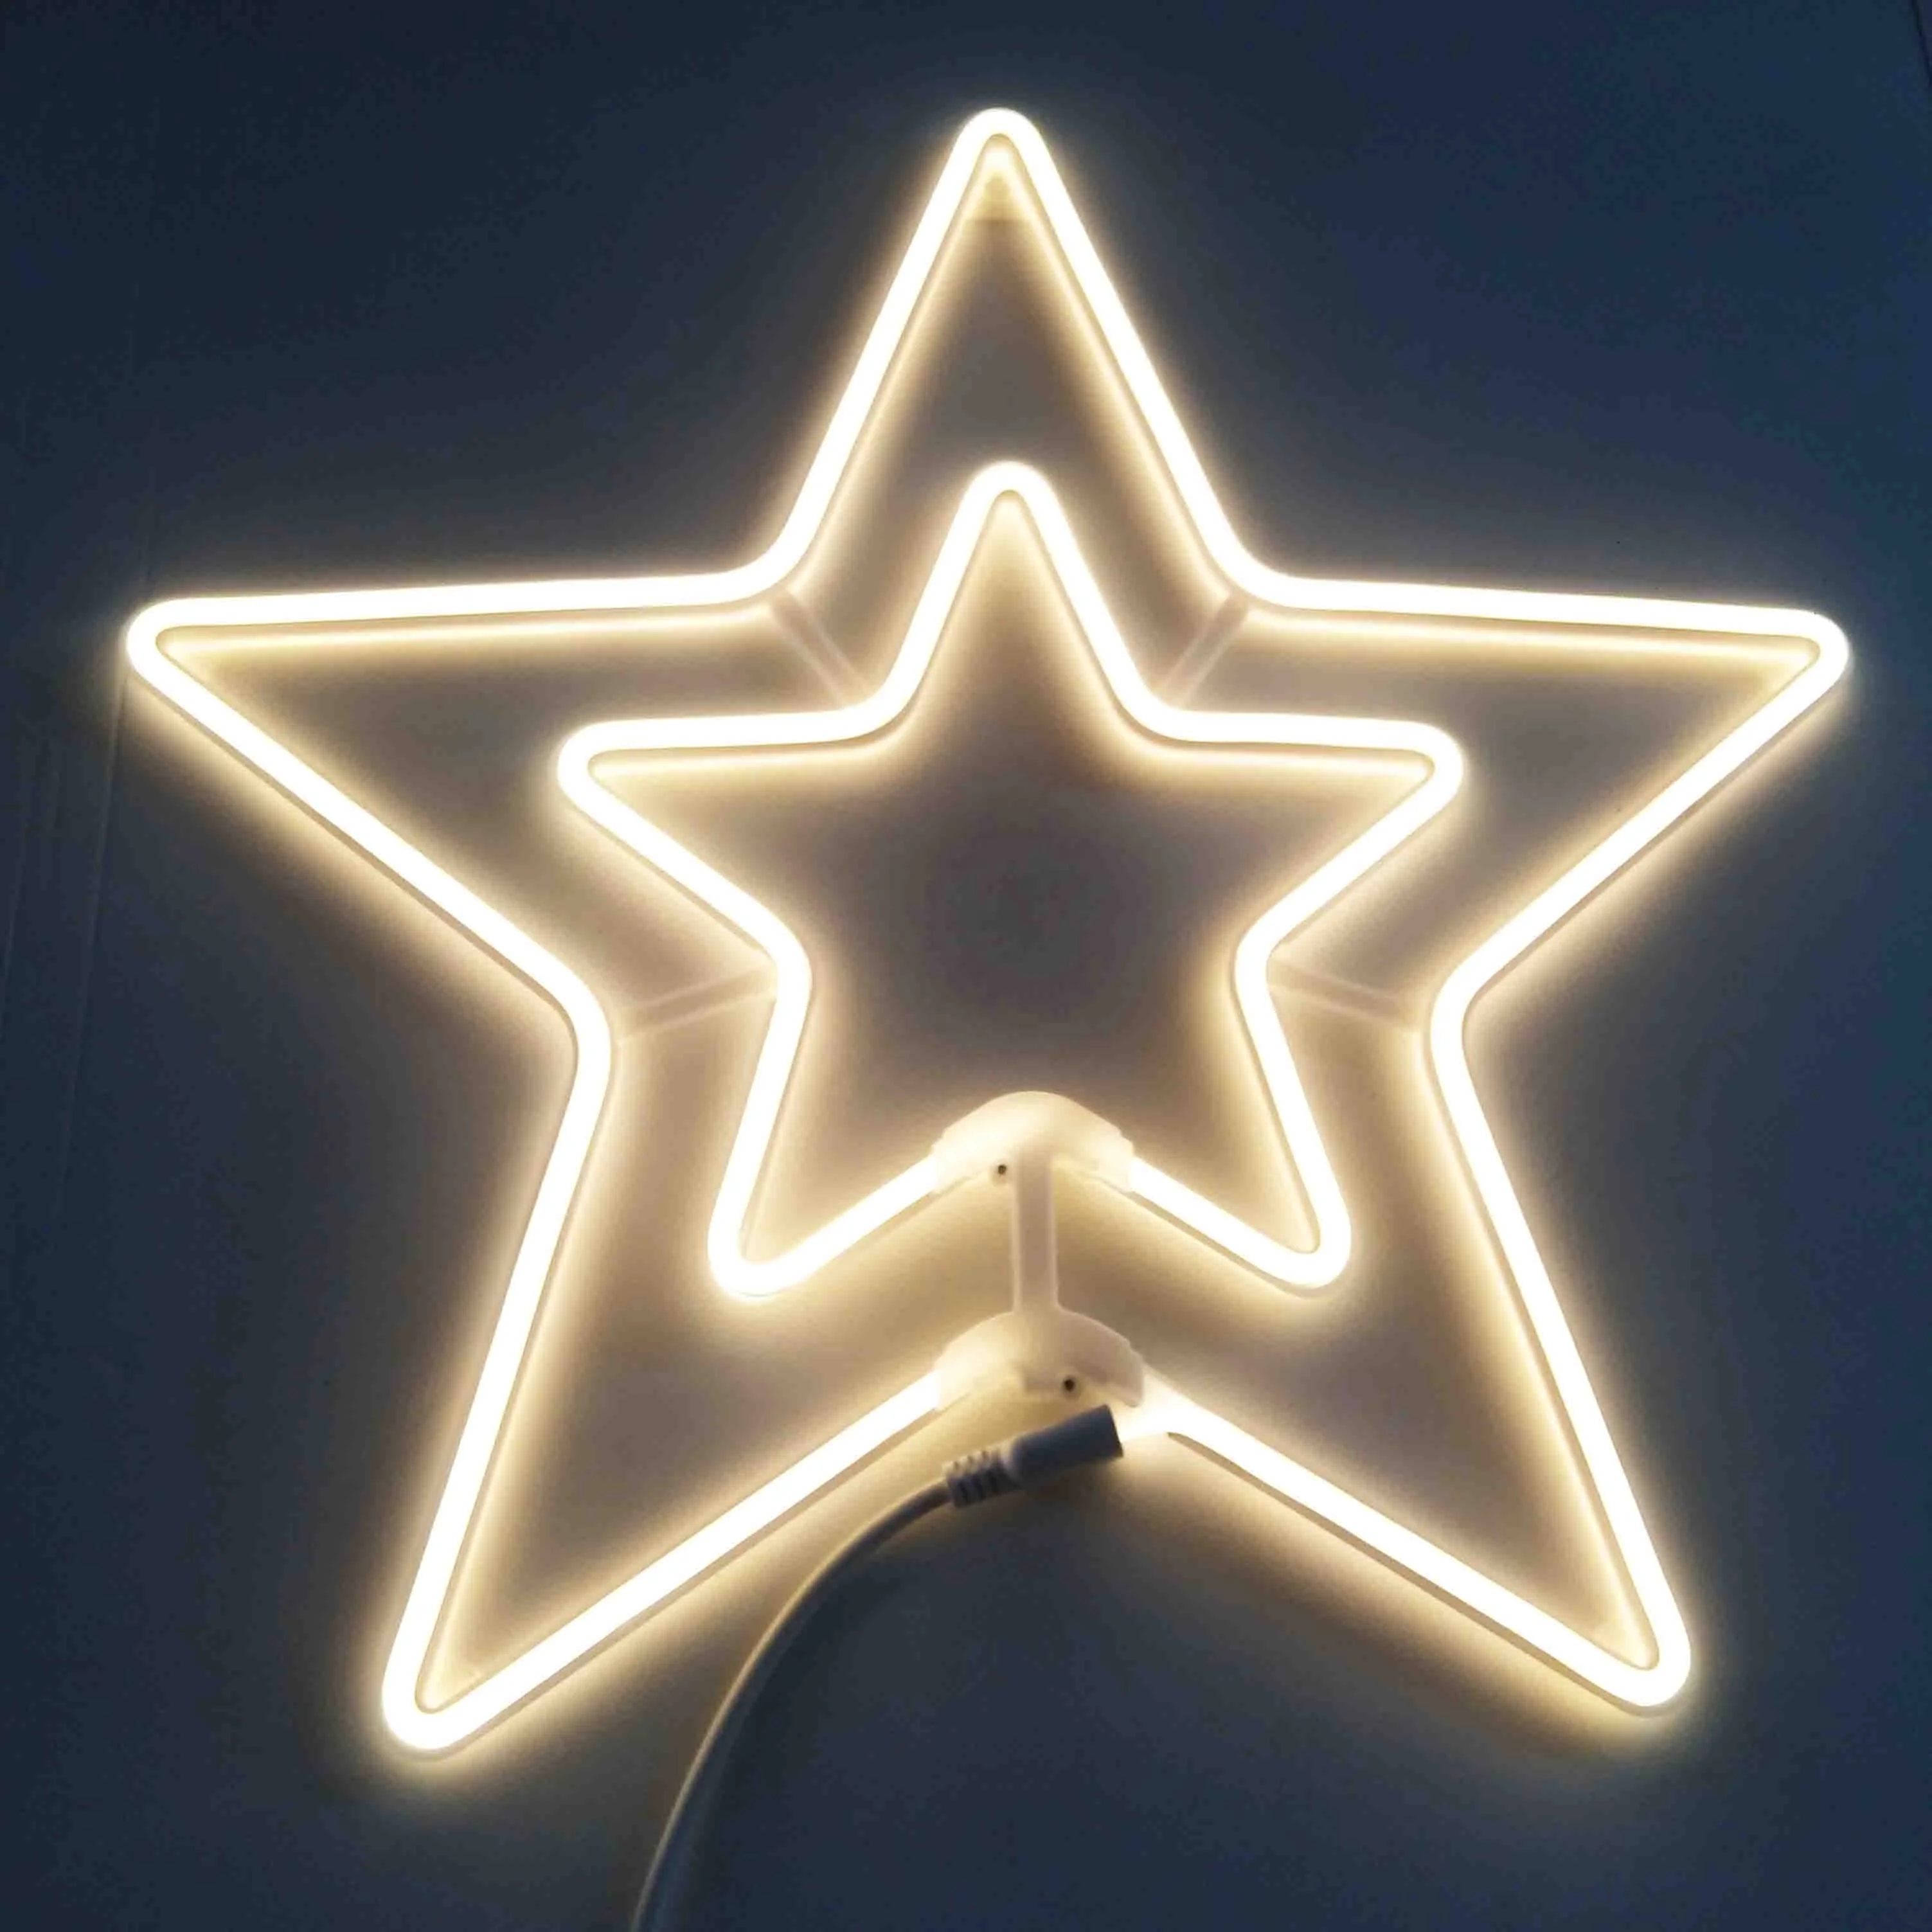 2019 Wholesale SMD LED Double Star neon tube light neon sign outdoor wall light holiday Xmas decoration